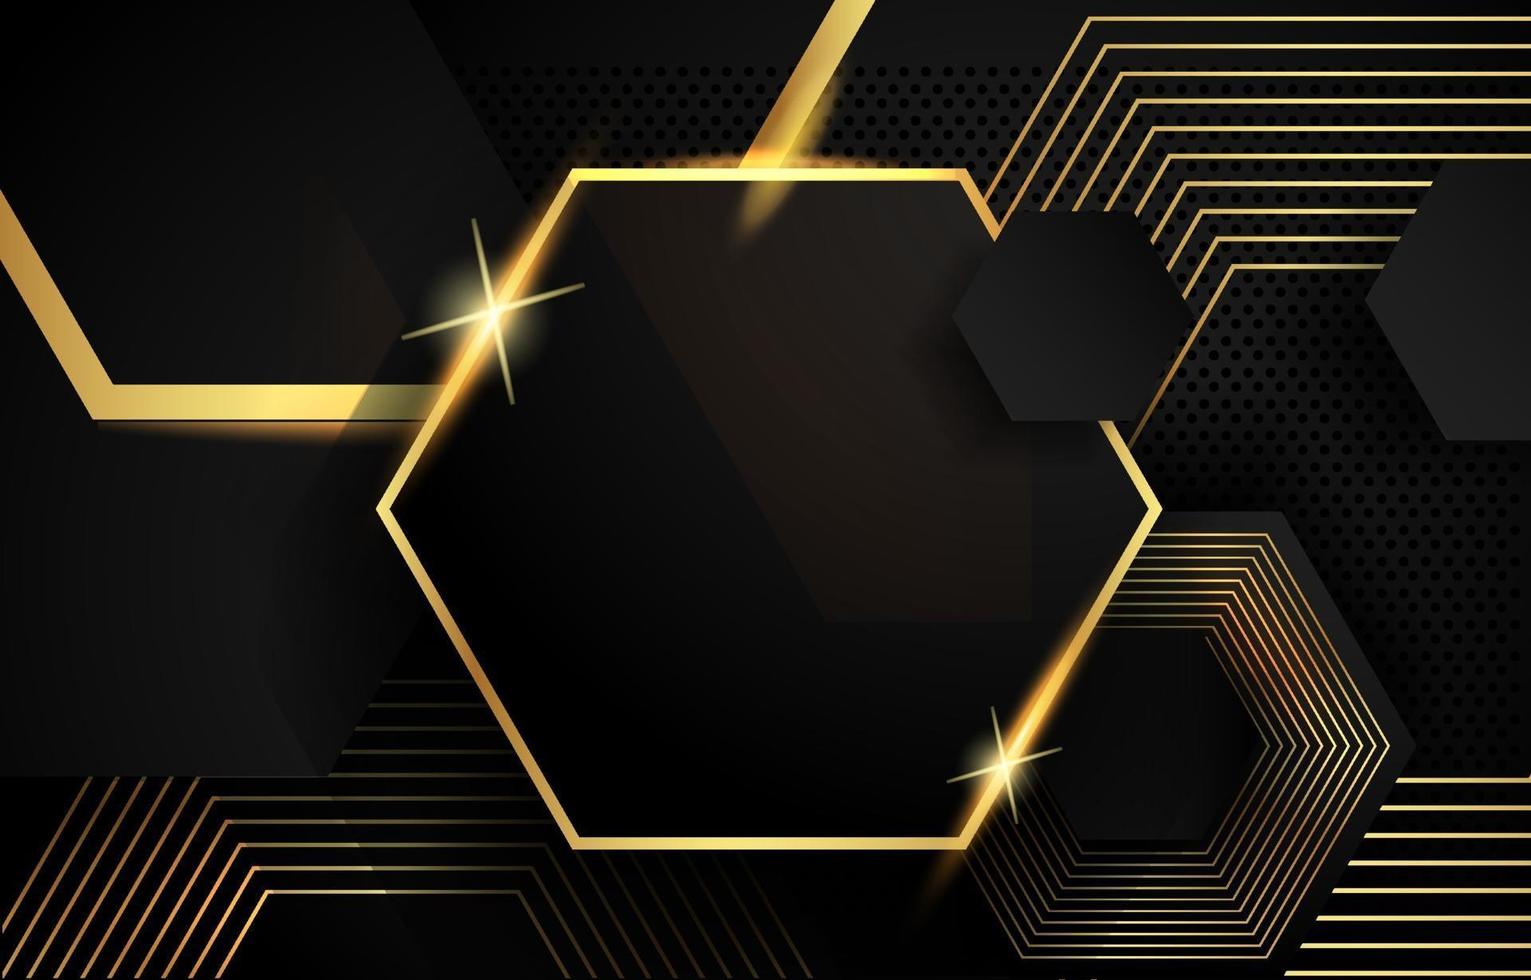 Black and Gold Hexagonal Background vector